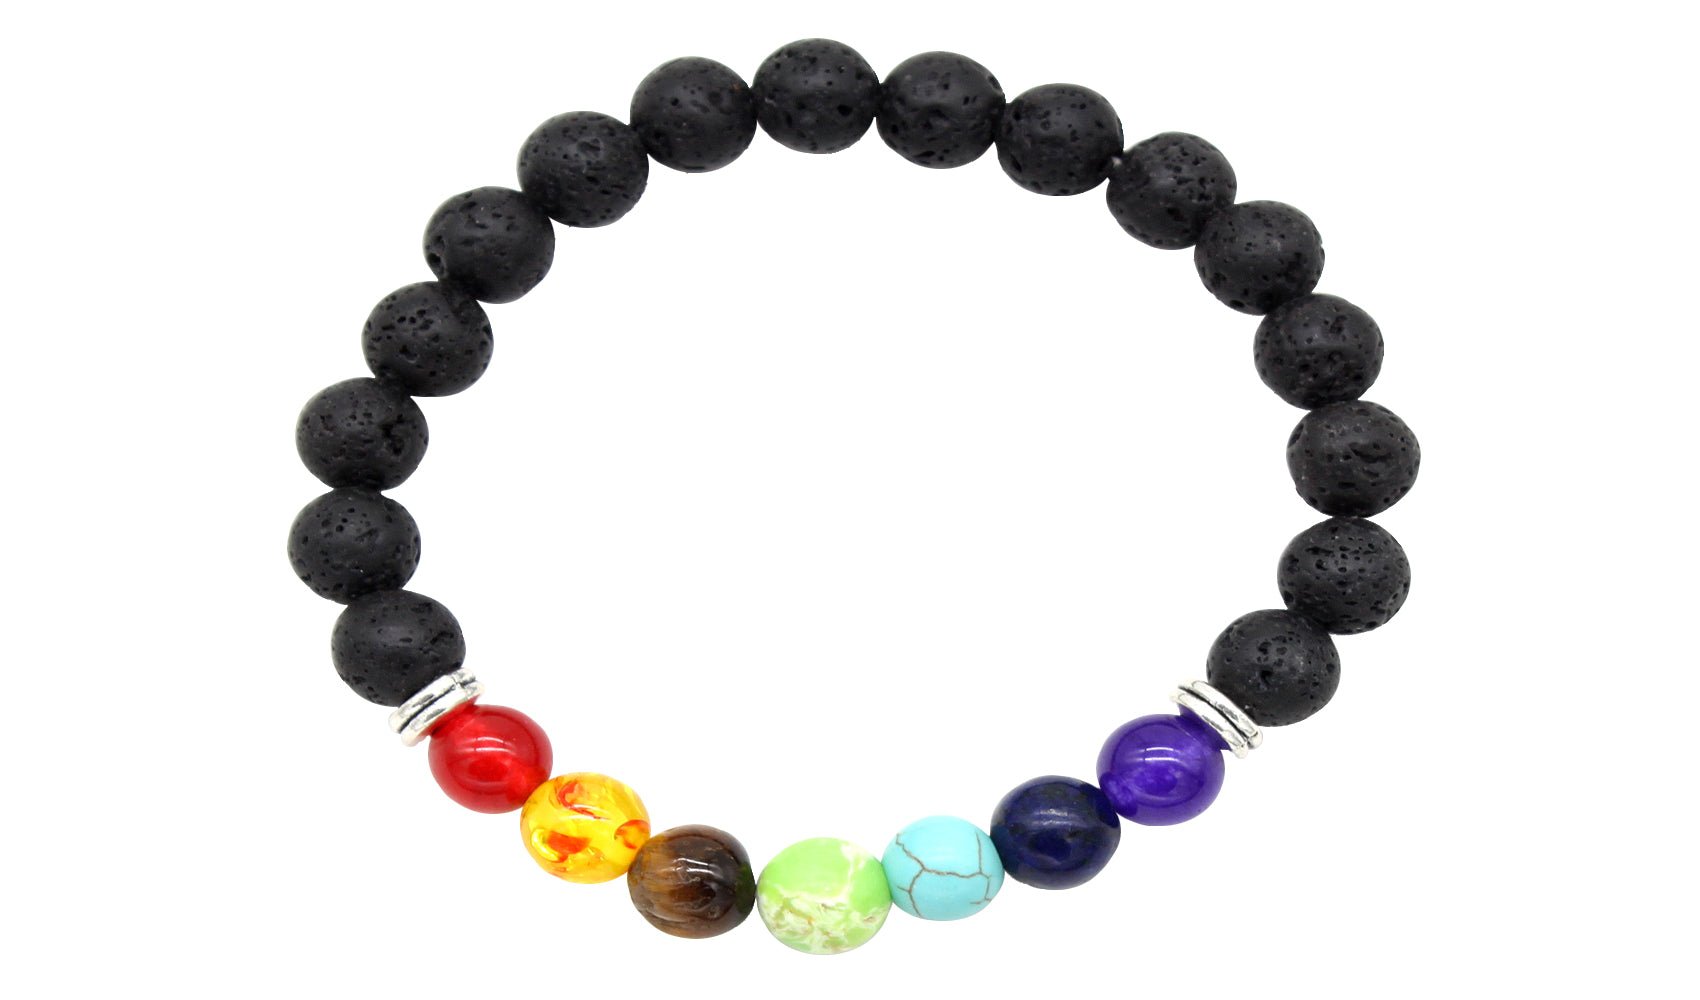 7-Genuine-Chakra-Healing-Natural-Stone-Bead-Anklet-Anklets